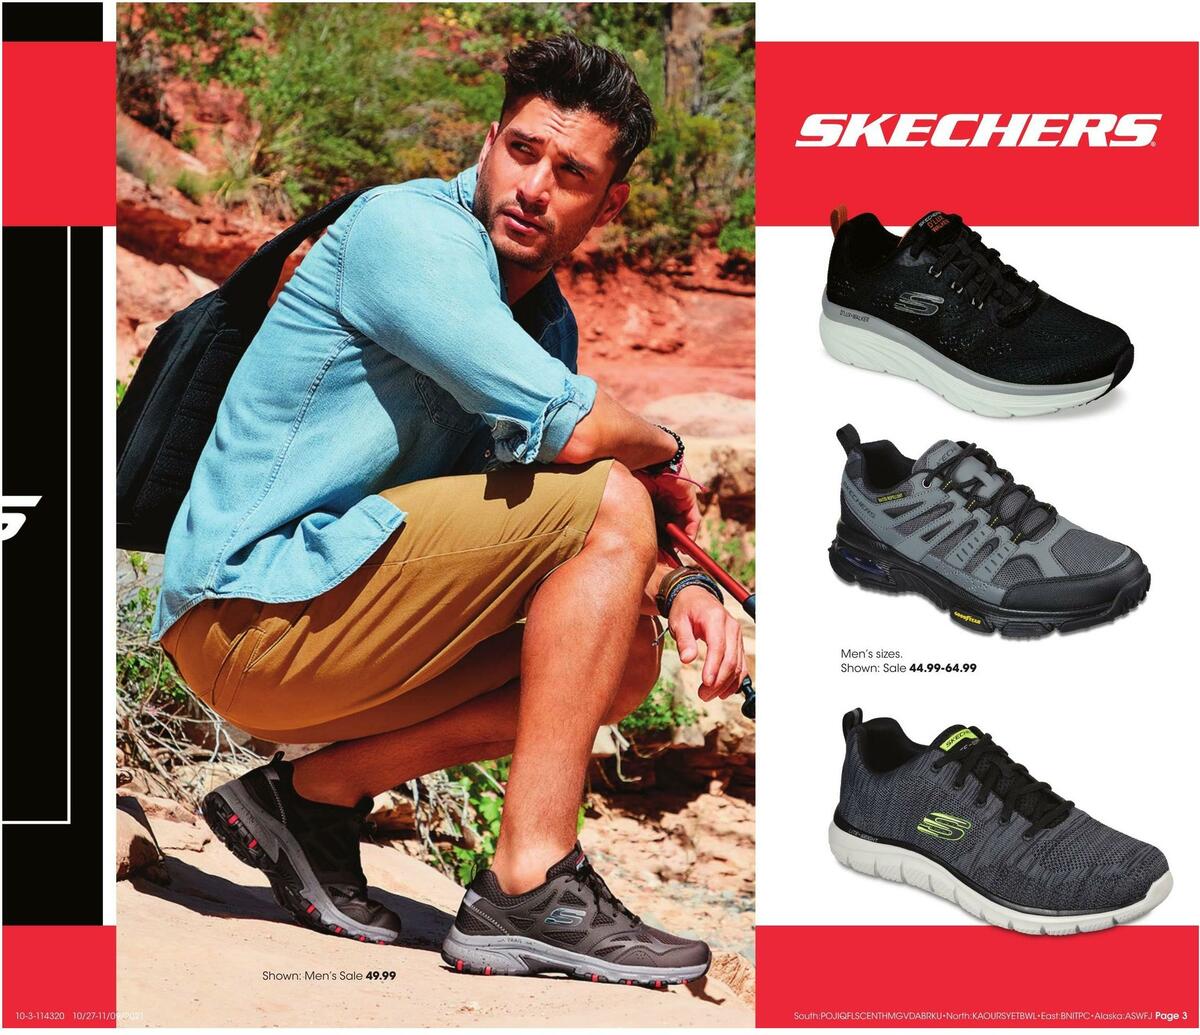 Fred Meyer Skechers Weekly Ad from October 27